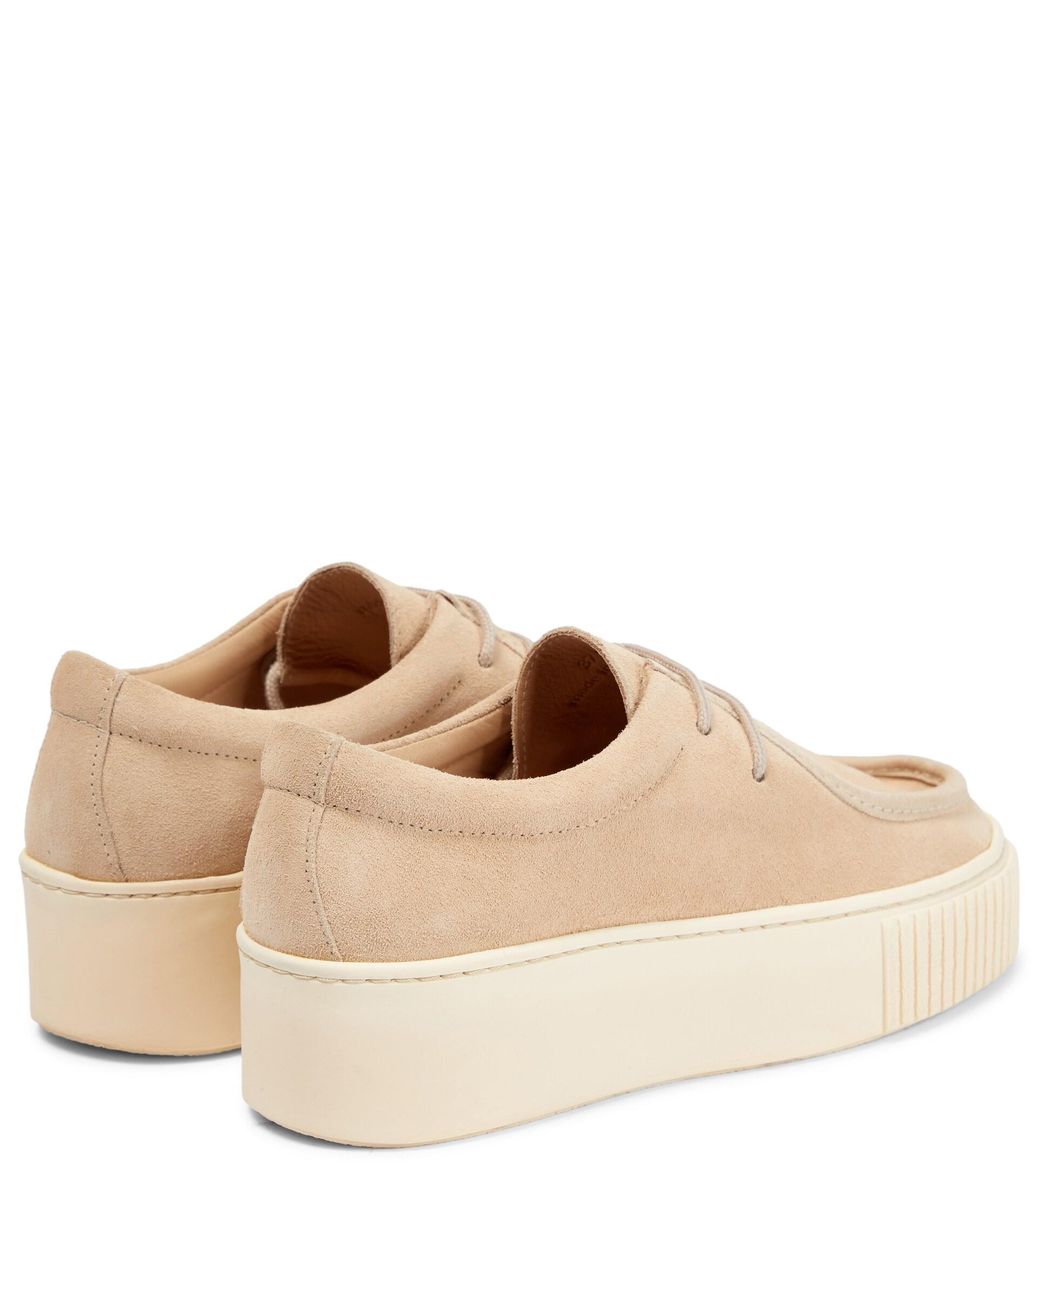 Gabriela Hearst Fontaina Suede Platform Sneakers in Natural | Lyst